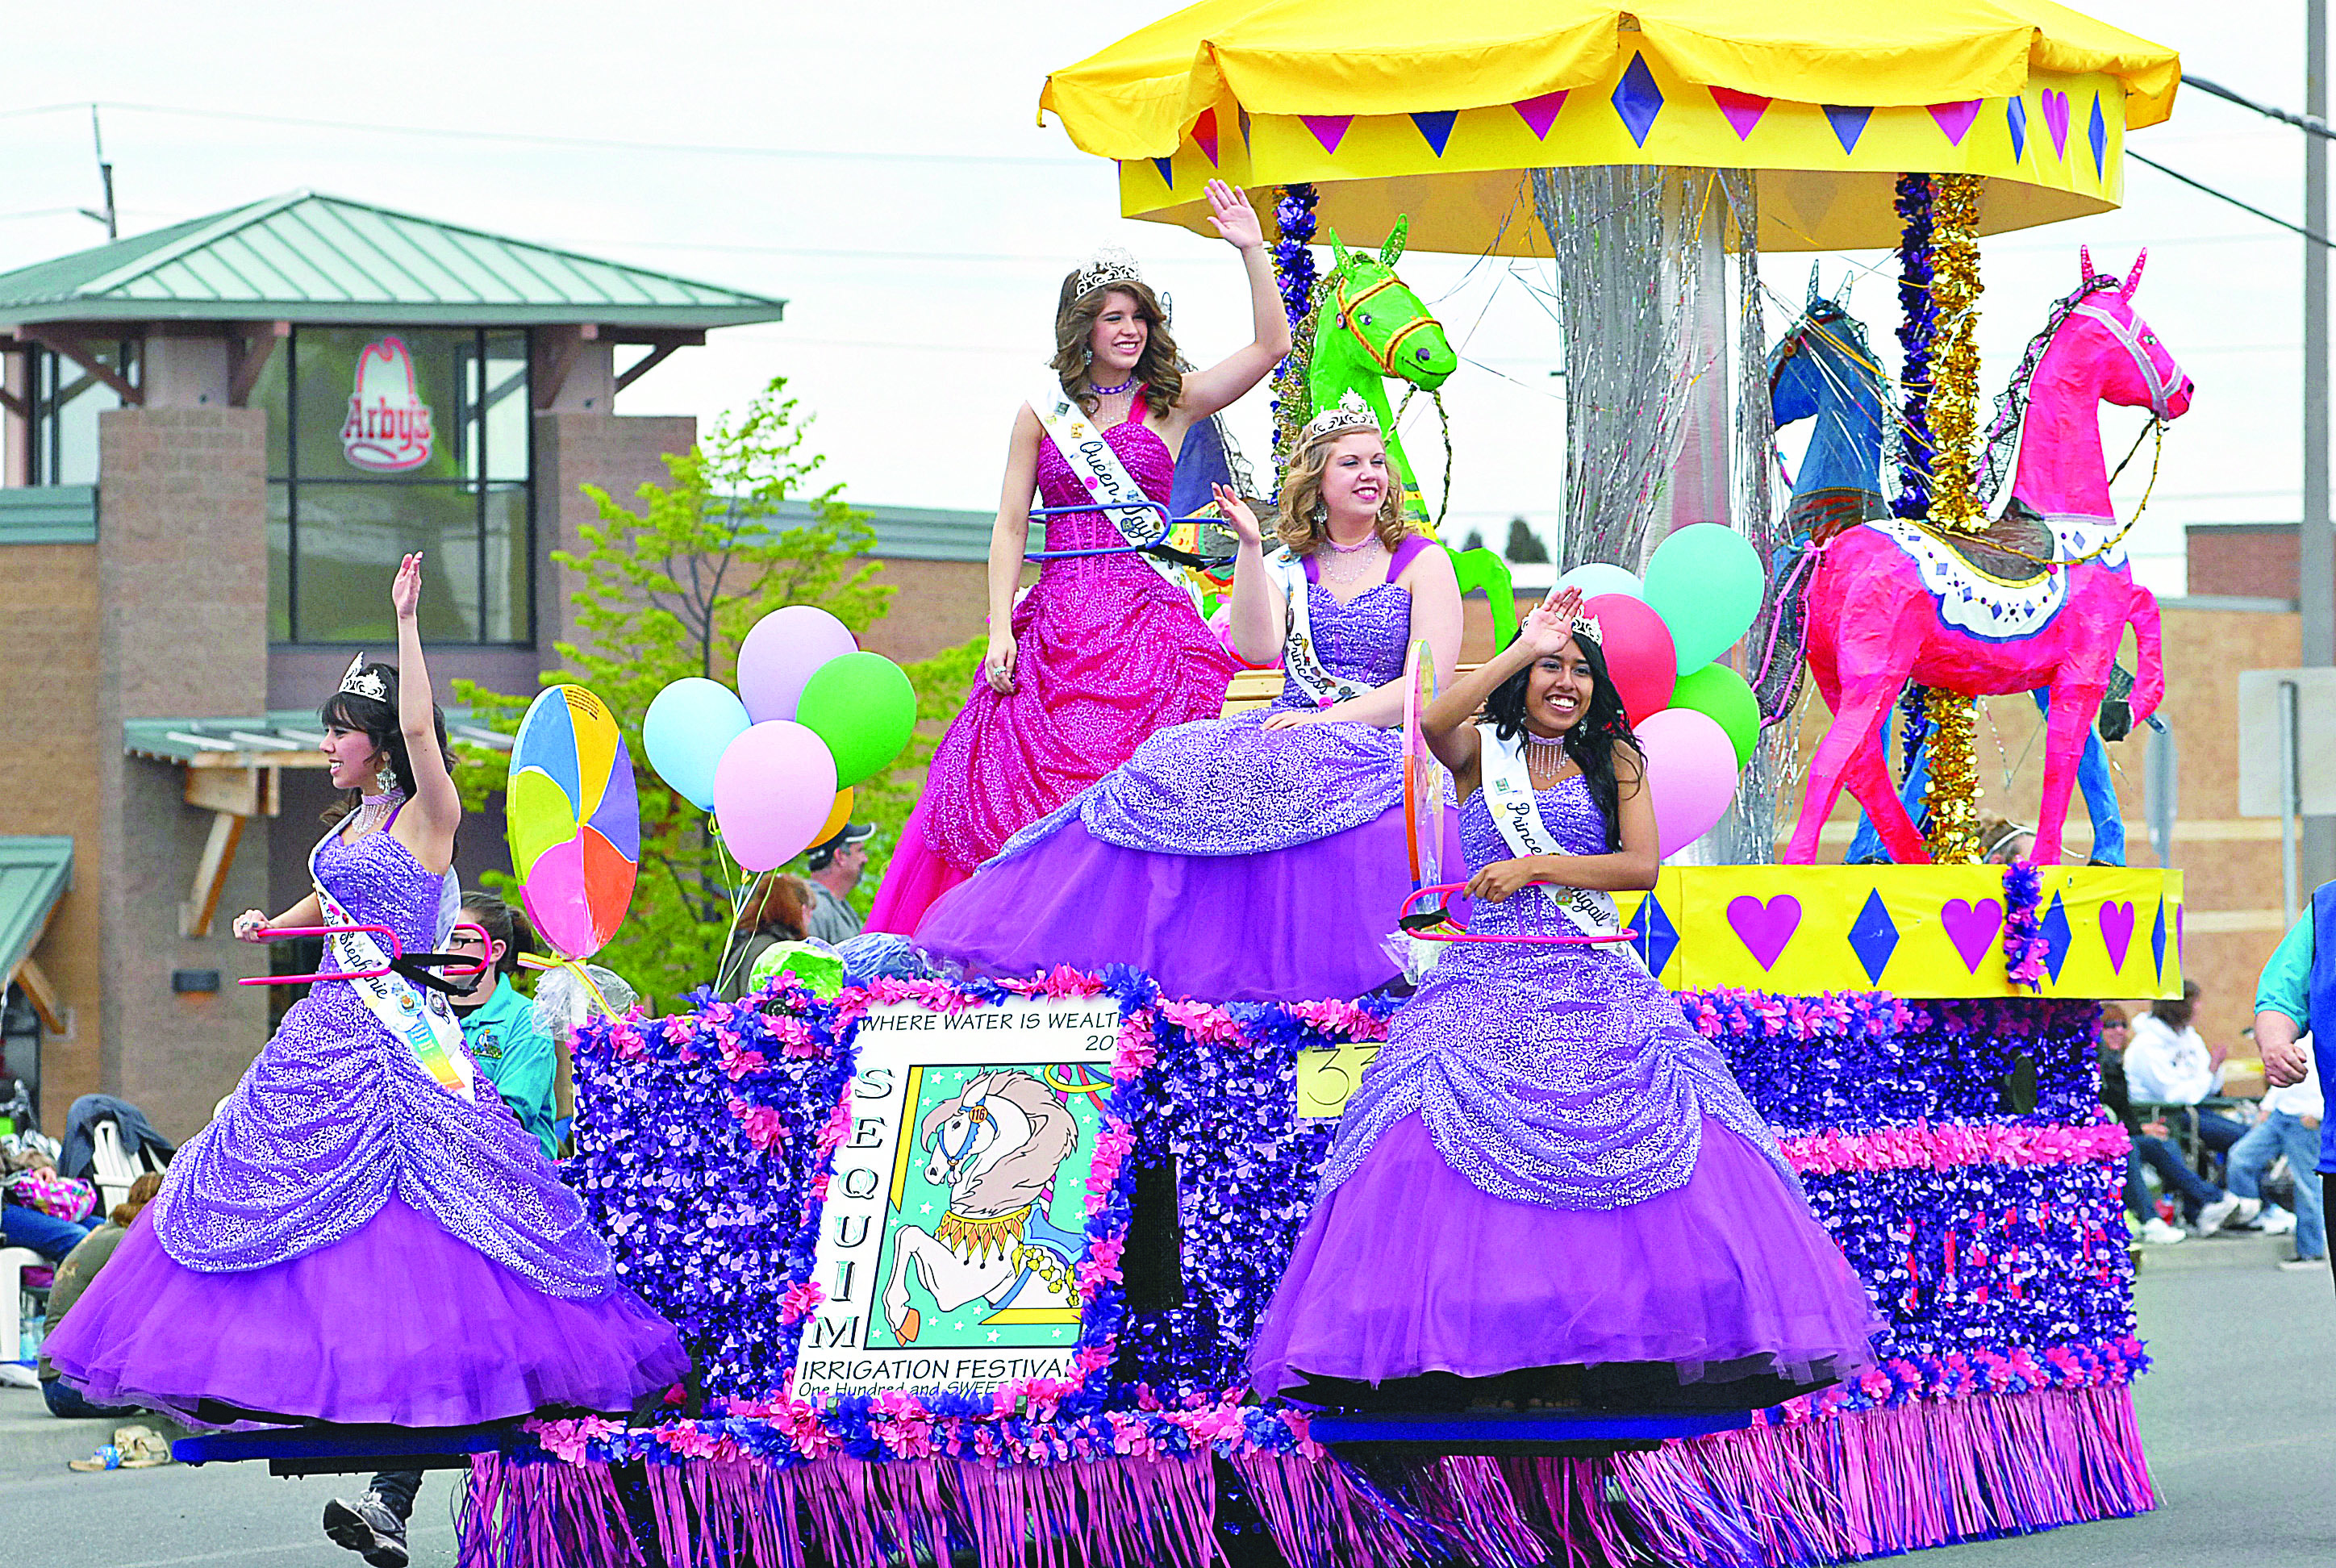 The Sequim Irrigation Festival parade float rolls down Washington Street in Sequim in 2011. From left are Princess Stephanie Laurie